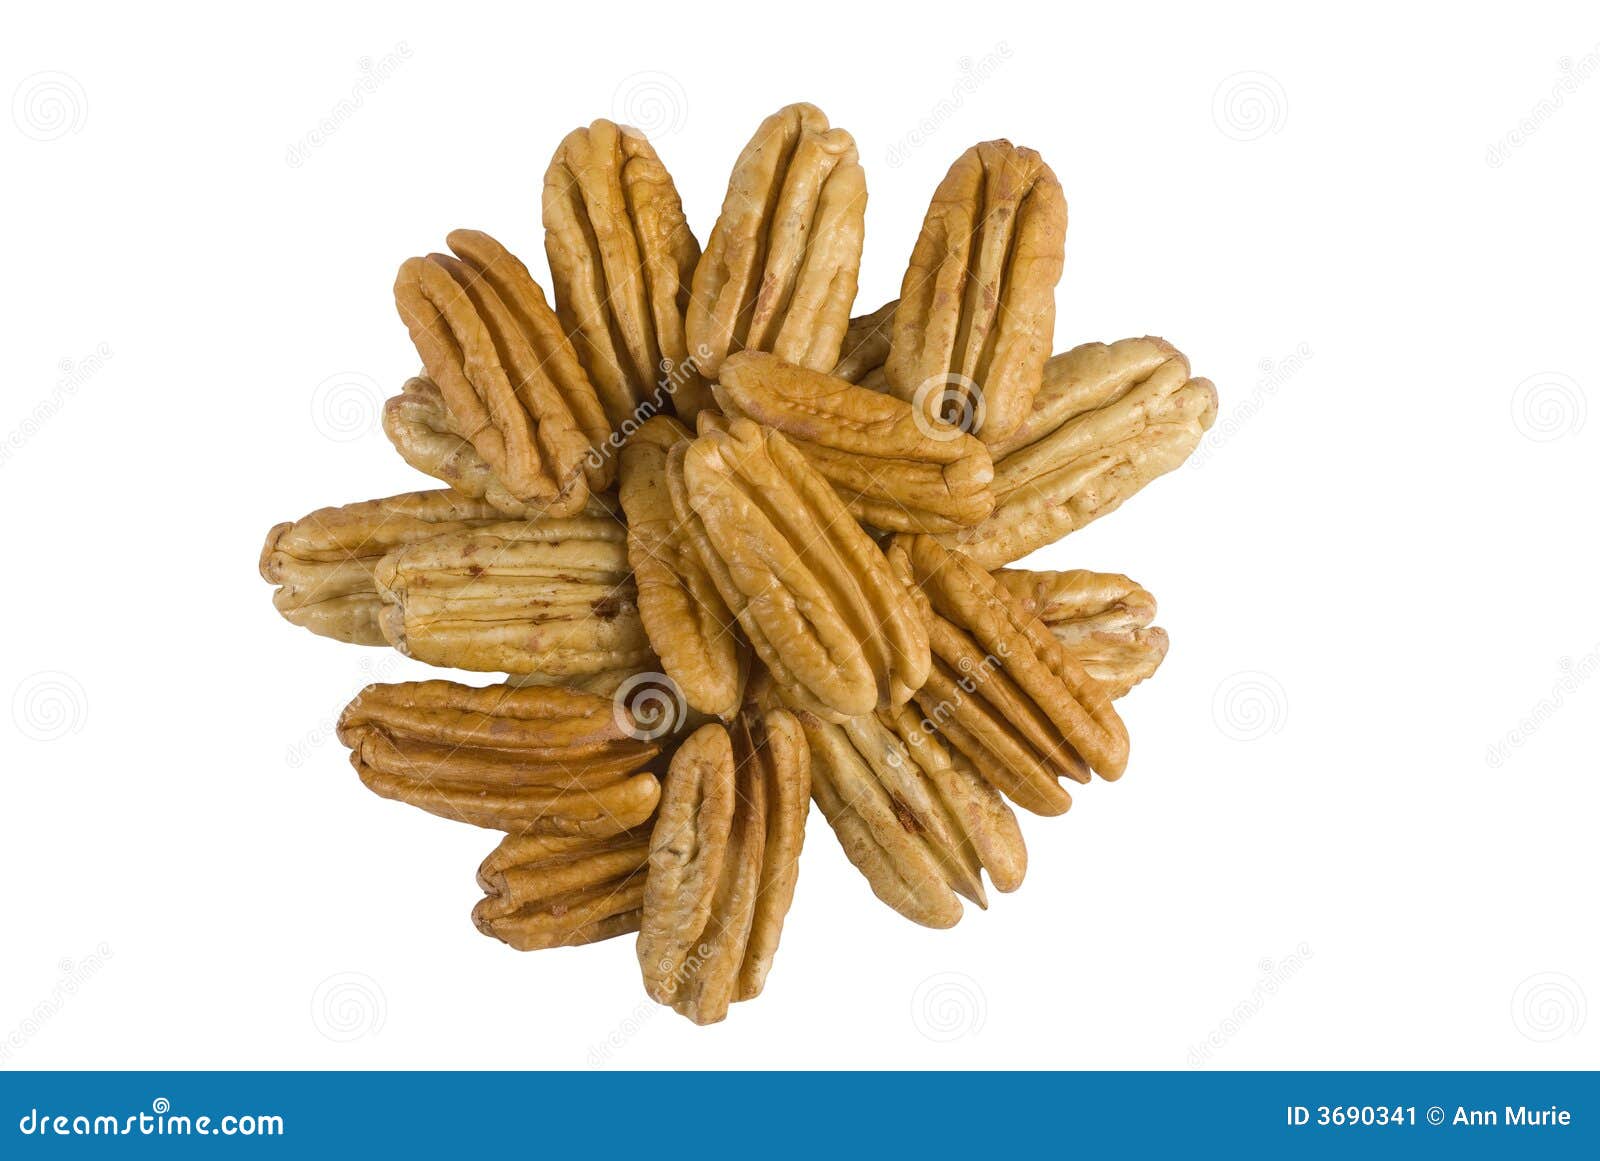 shelled pecan nuts